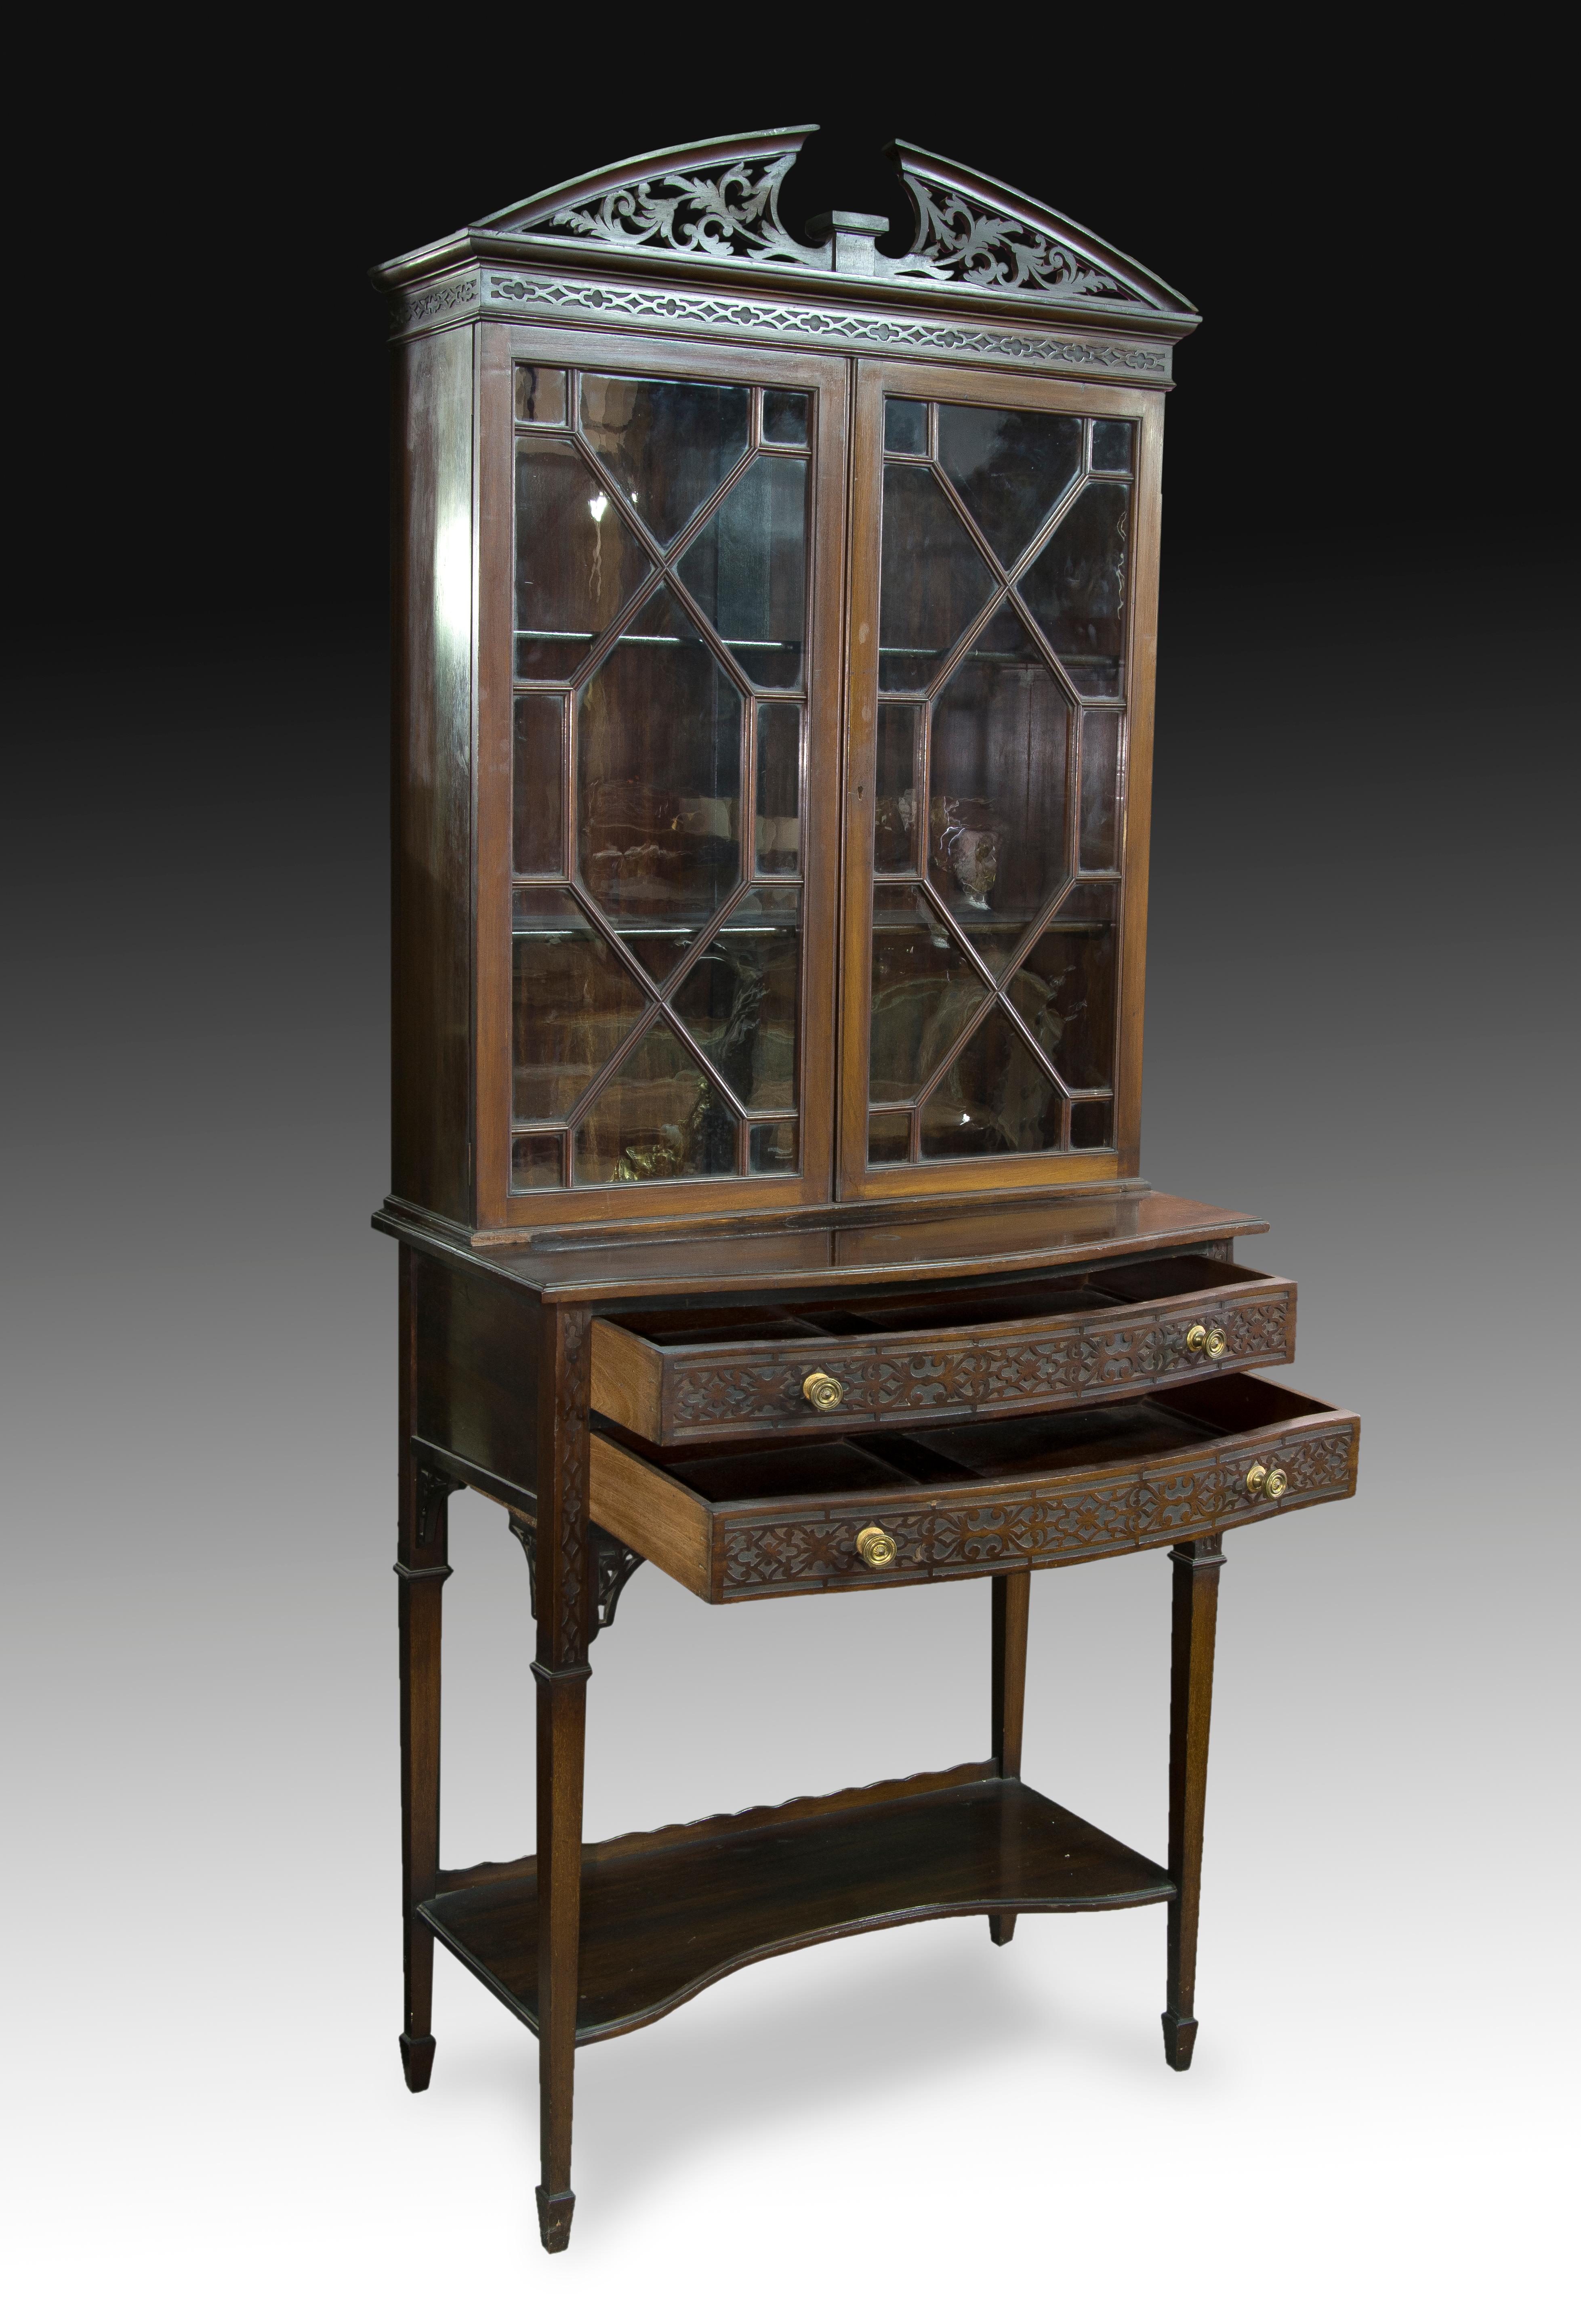 English showcase. Mahogany wood, XIX century. 
 Showcase with shelves and two doors with glass and geometric decoration topped by a split pediment with vegetal decoration, which is presented on a cabinet with two drawers in front, four legs and a